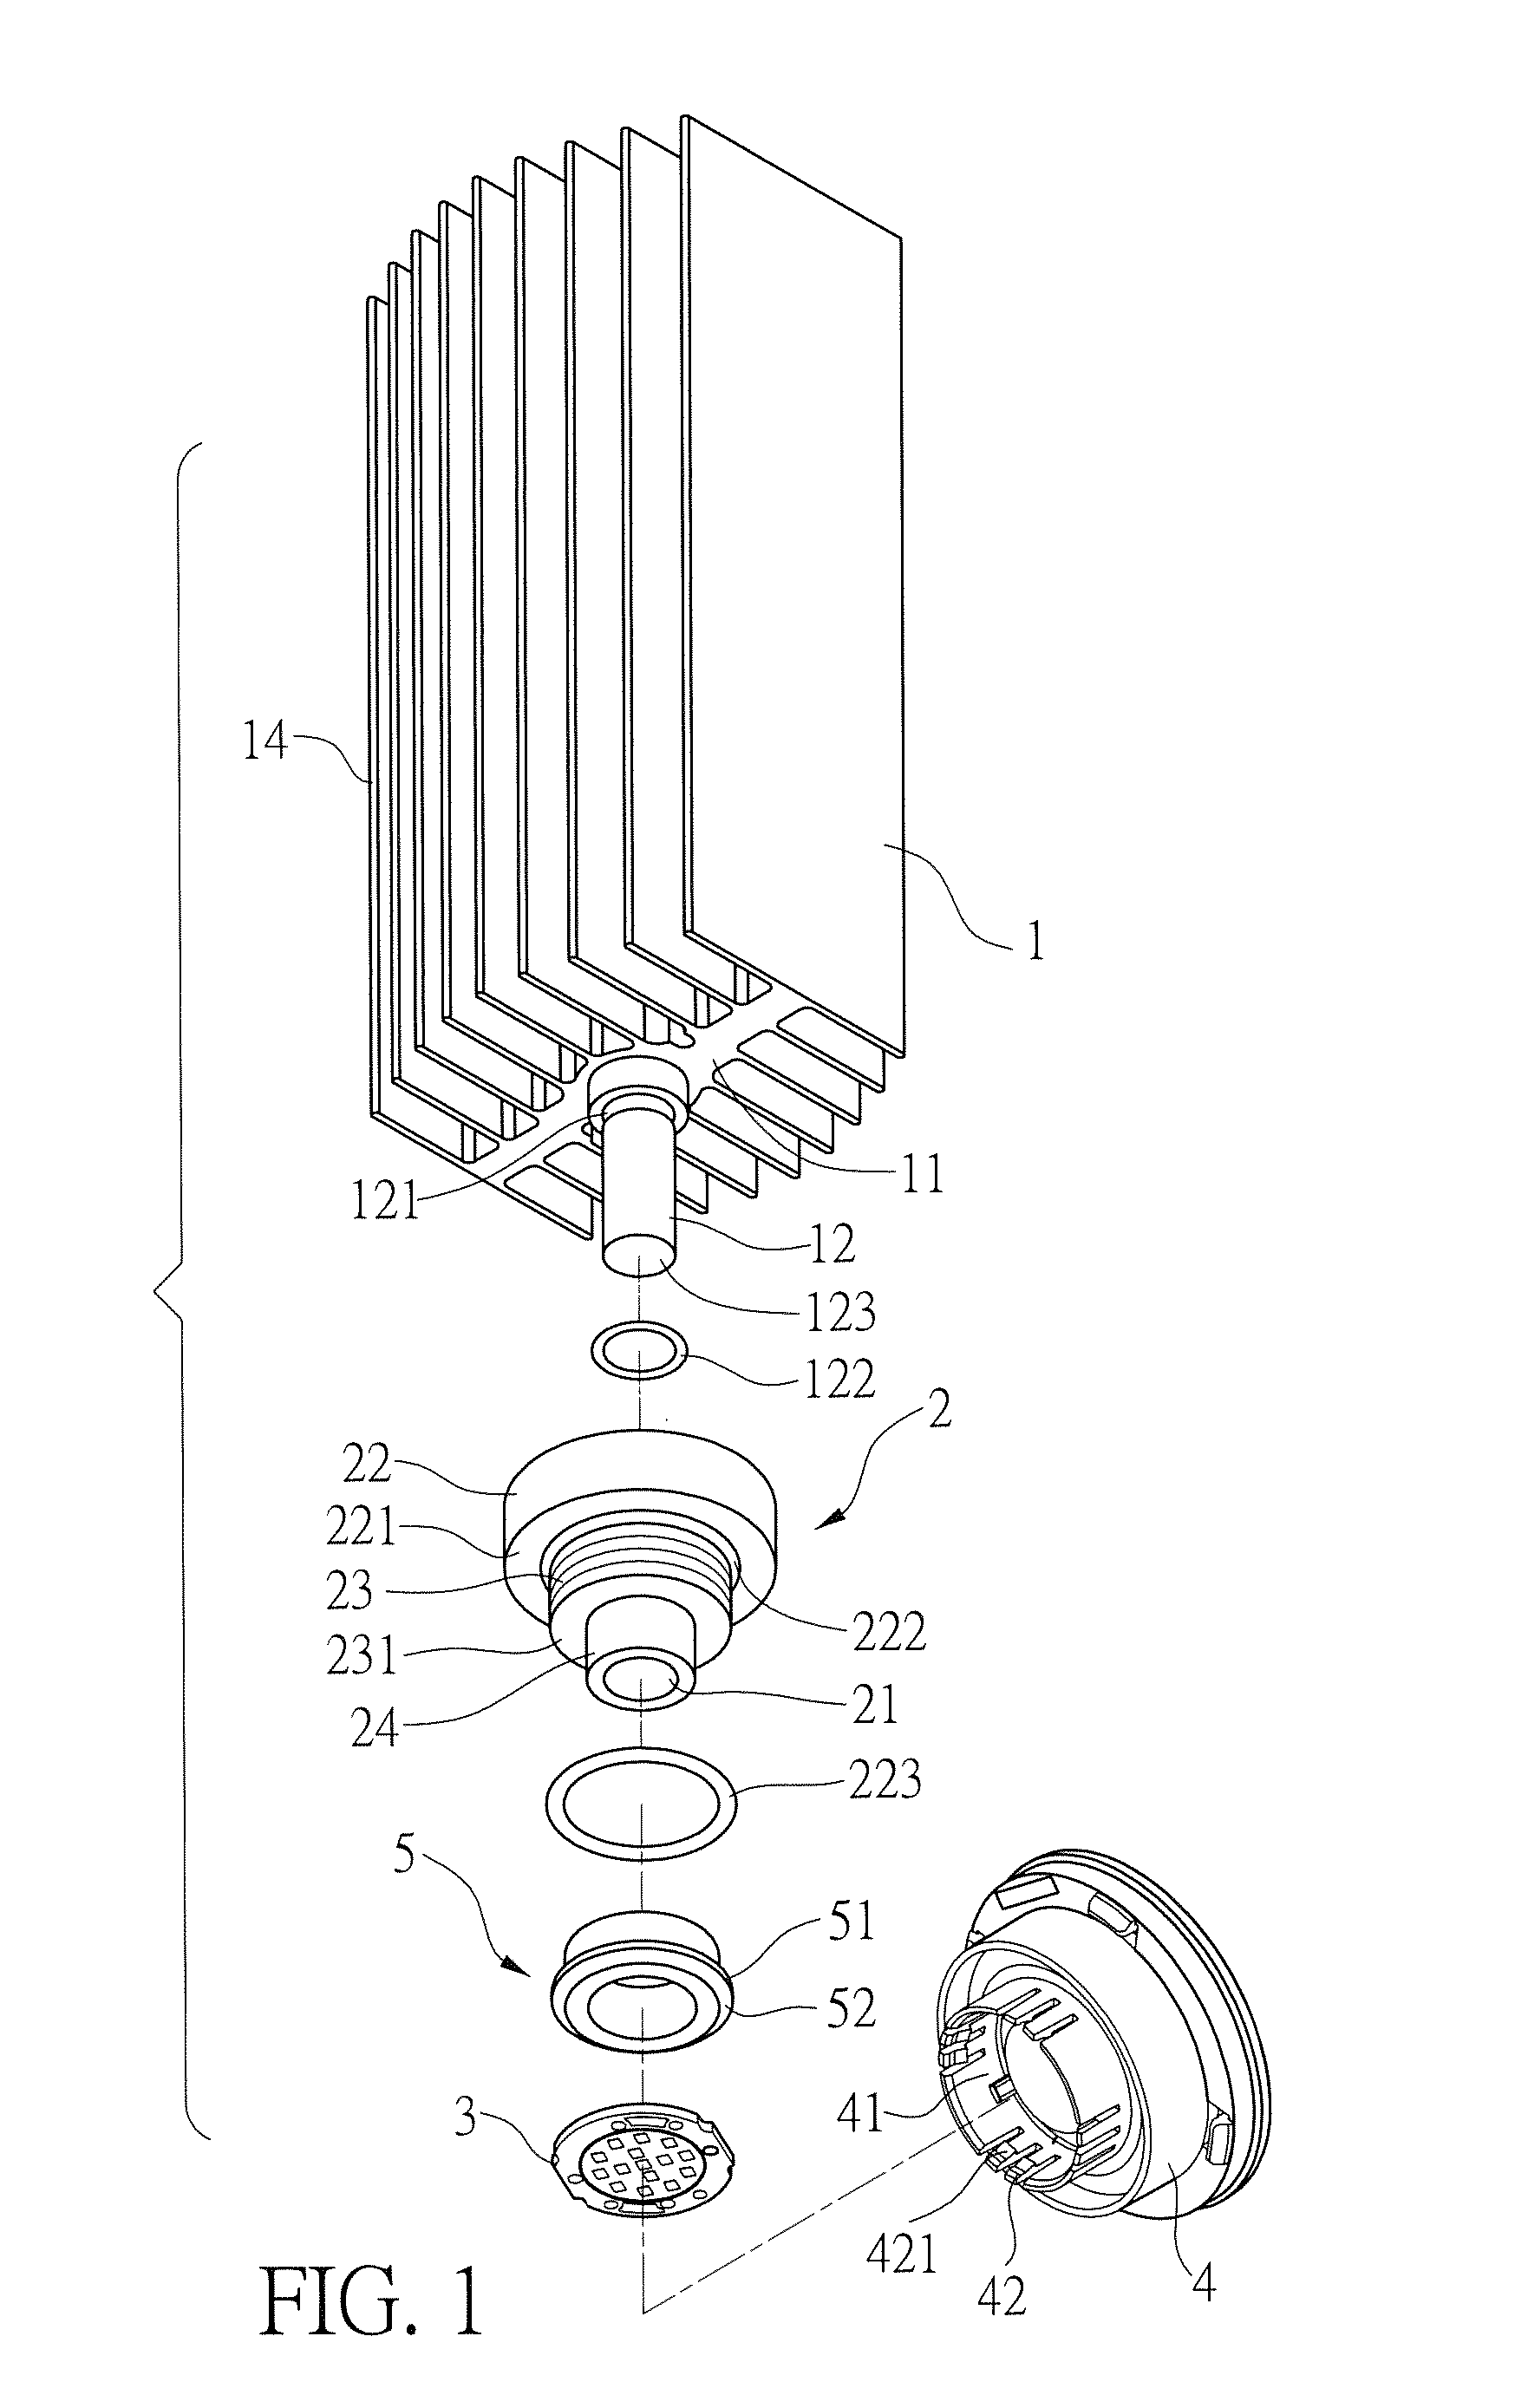 LED heat dissipation structure